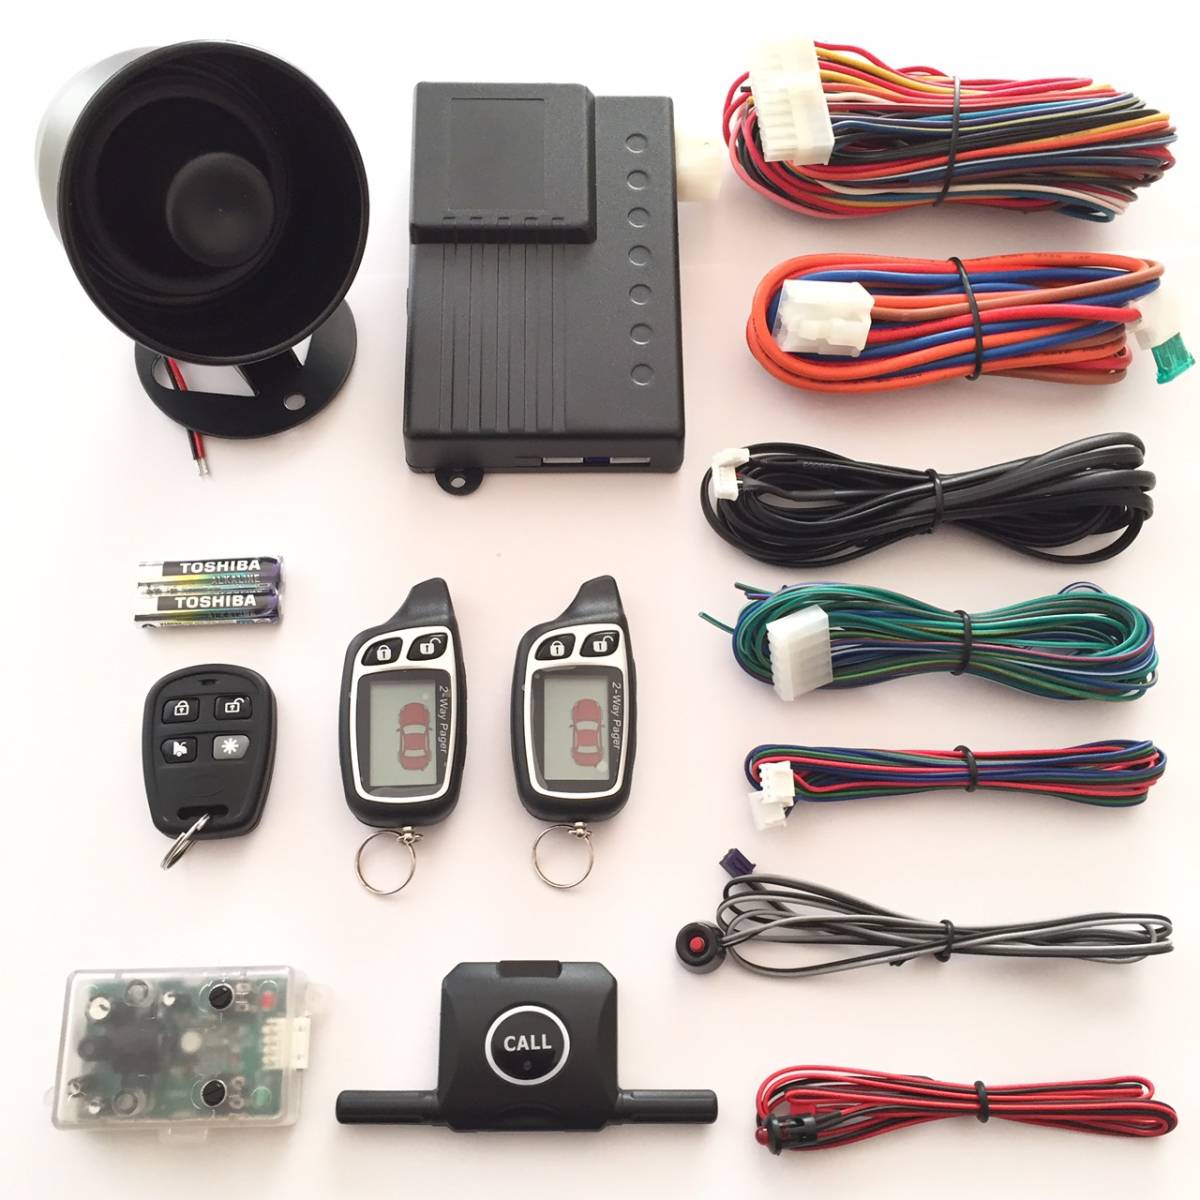  Hijet S320G S330G keyless attaching .AT car wiring data attaching # liquid crystal remote control, engine starter, car security,do Mini k siren 